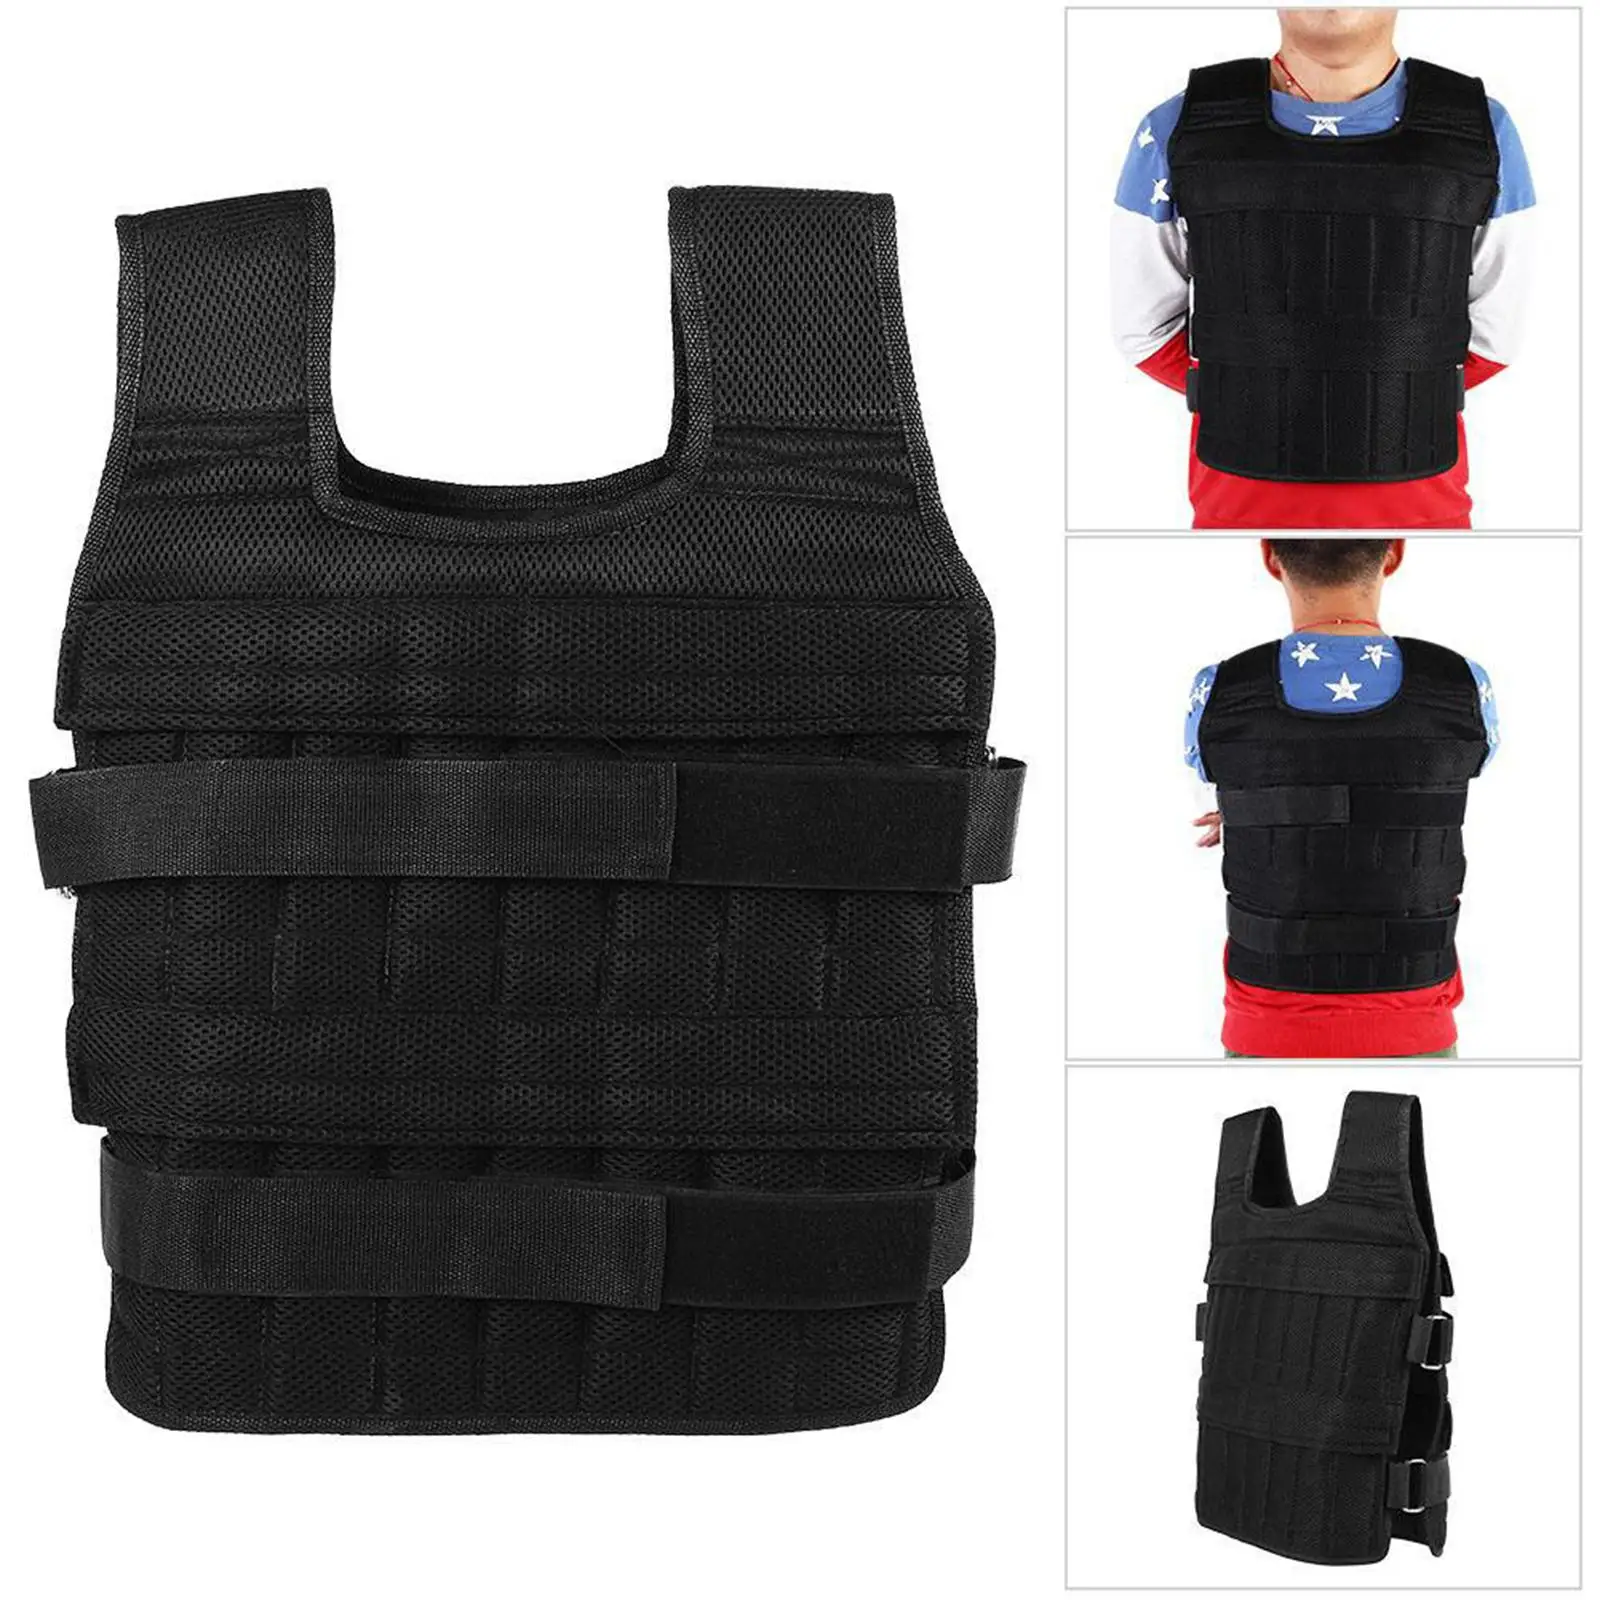 Professional Adjustable weight vest with 32 Bags Neoprene Durable Soft 110lbs